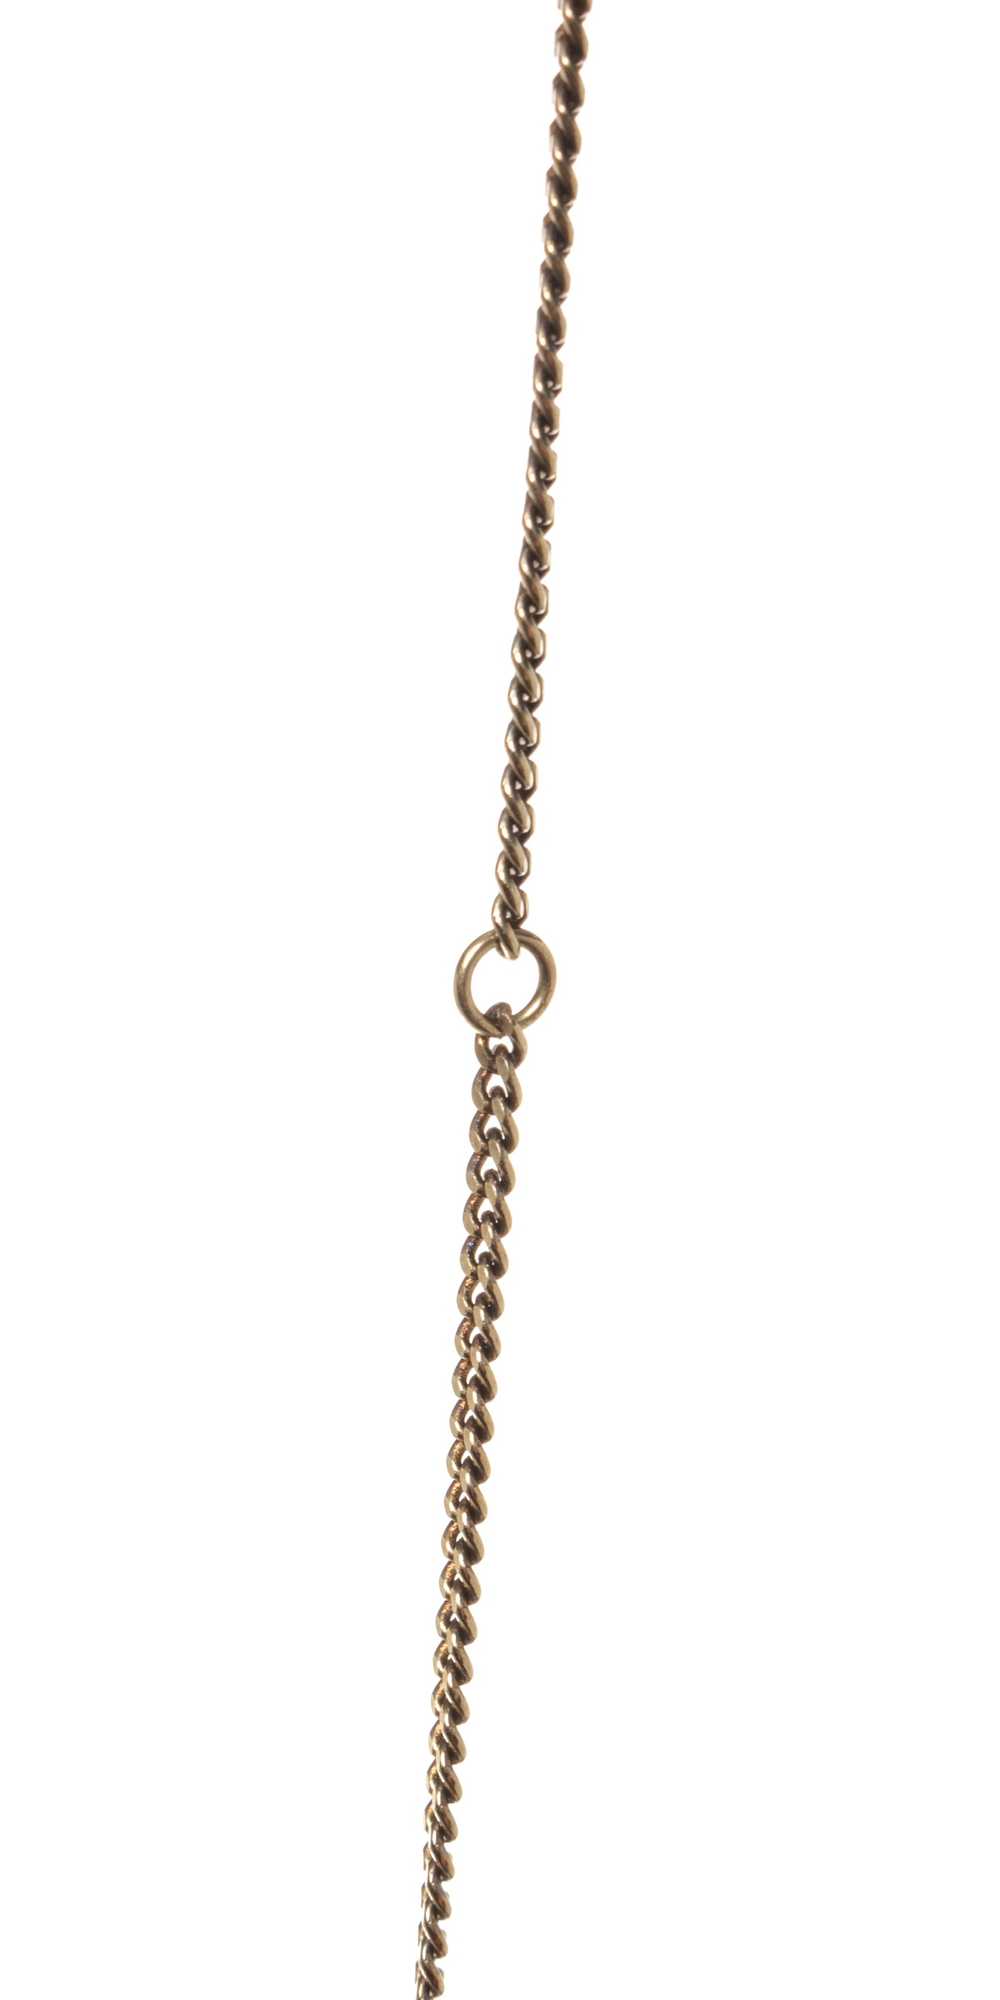 Chanel Chanel Red Stone Teardrop Pearl Necklace - image 7